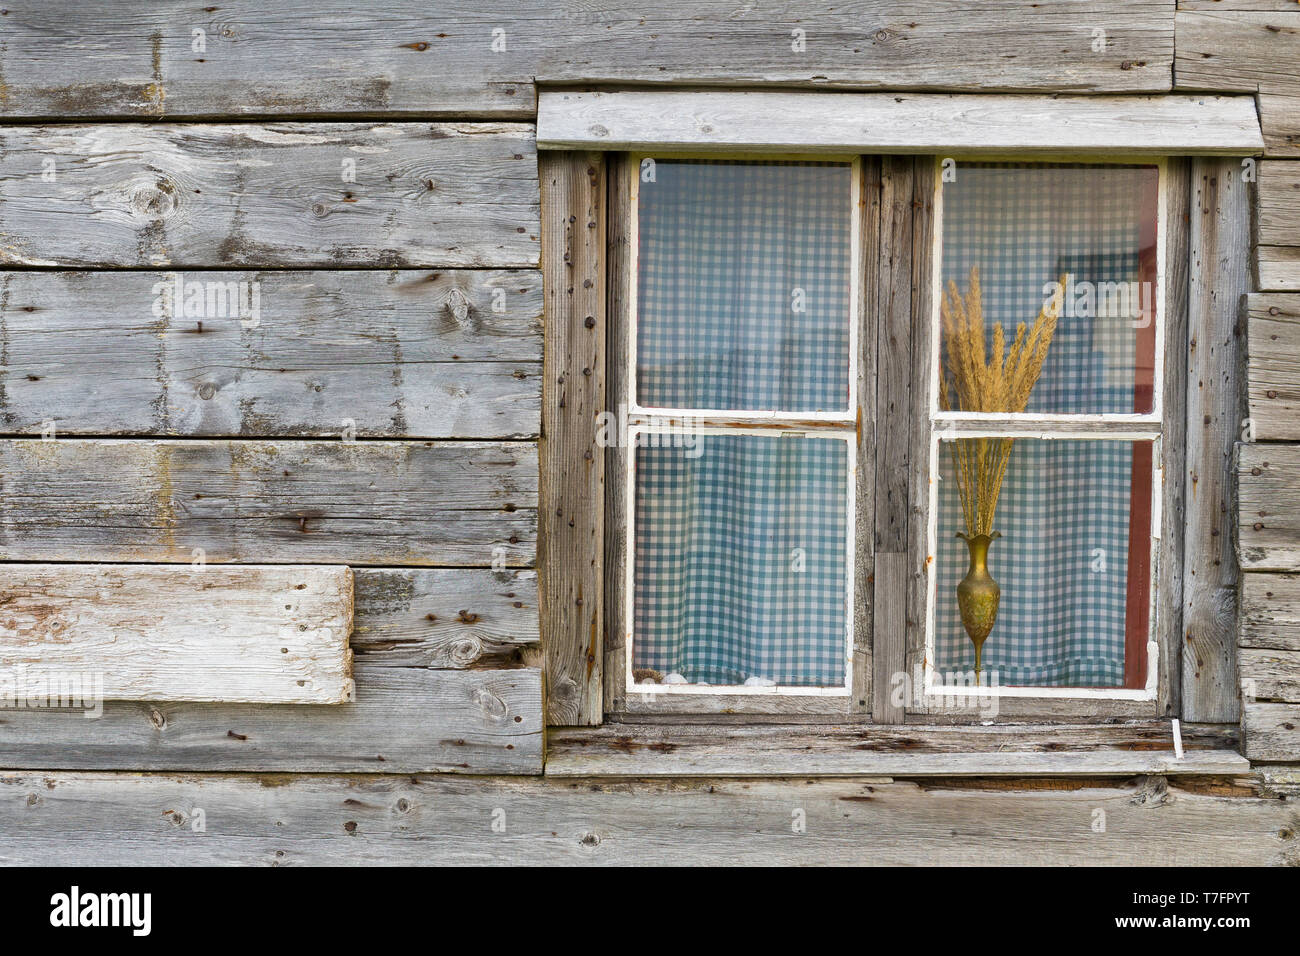 Window, widow of wooden house with curtain Stock Photo